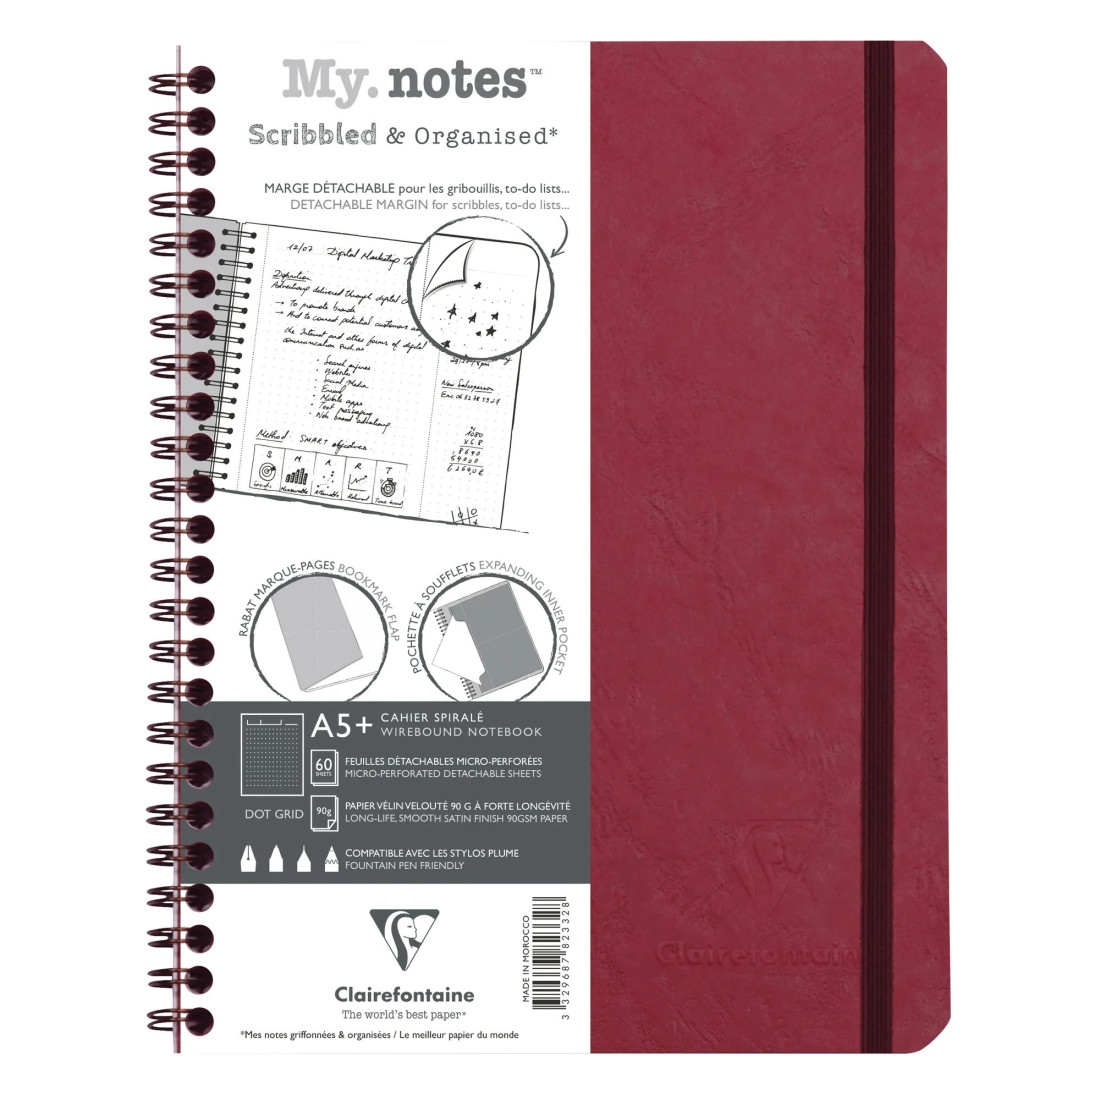 Clairefontaine Rhodia My.Notes Age Bag full-bound notebook with detachable margins A5+, 16x21cm, 120 detachable pages DOT + header frame - Red 82362